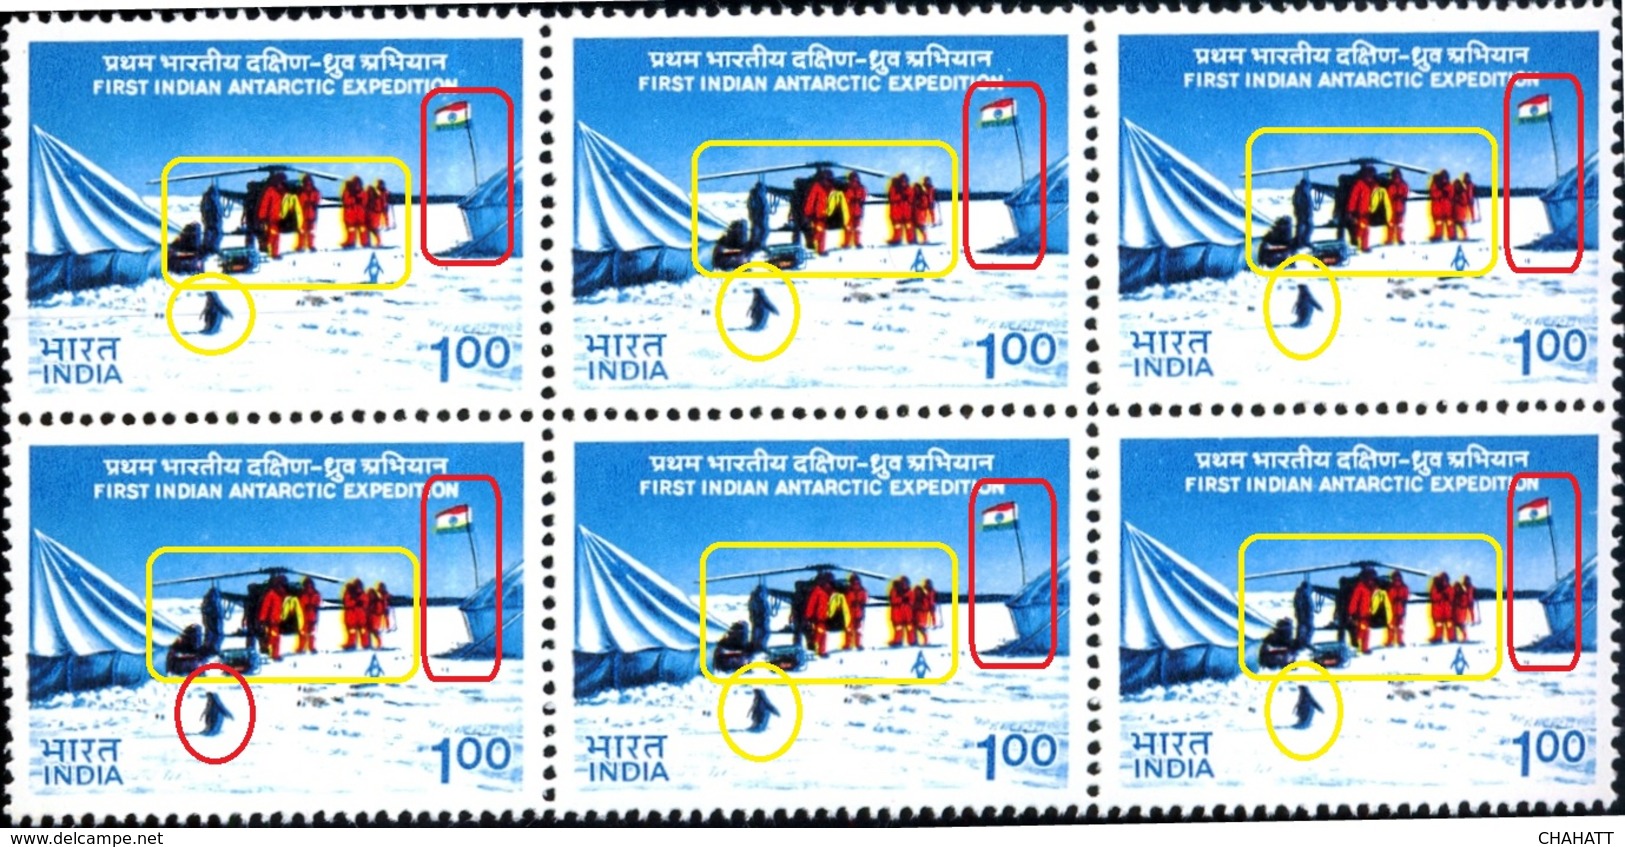 FIRST INDIAN ANTARCTIC EXPEDITION-PENGUINS-INDIAN FLAG-HELICOPTERS-ERROR-BLOCK OF 6-INDIA-1990-RARE-MNH-B9-873 - Programmi Di Ricerca